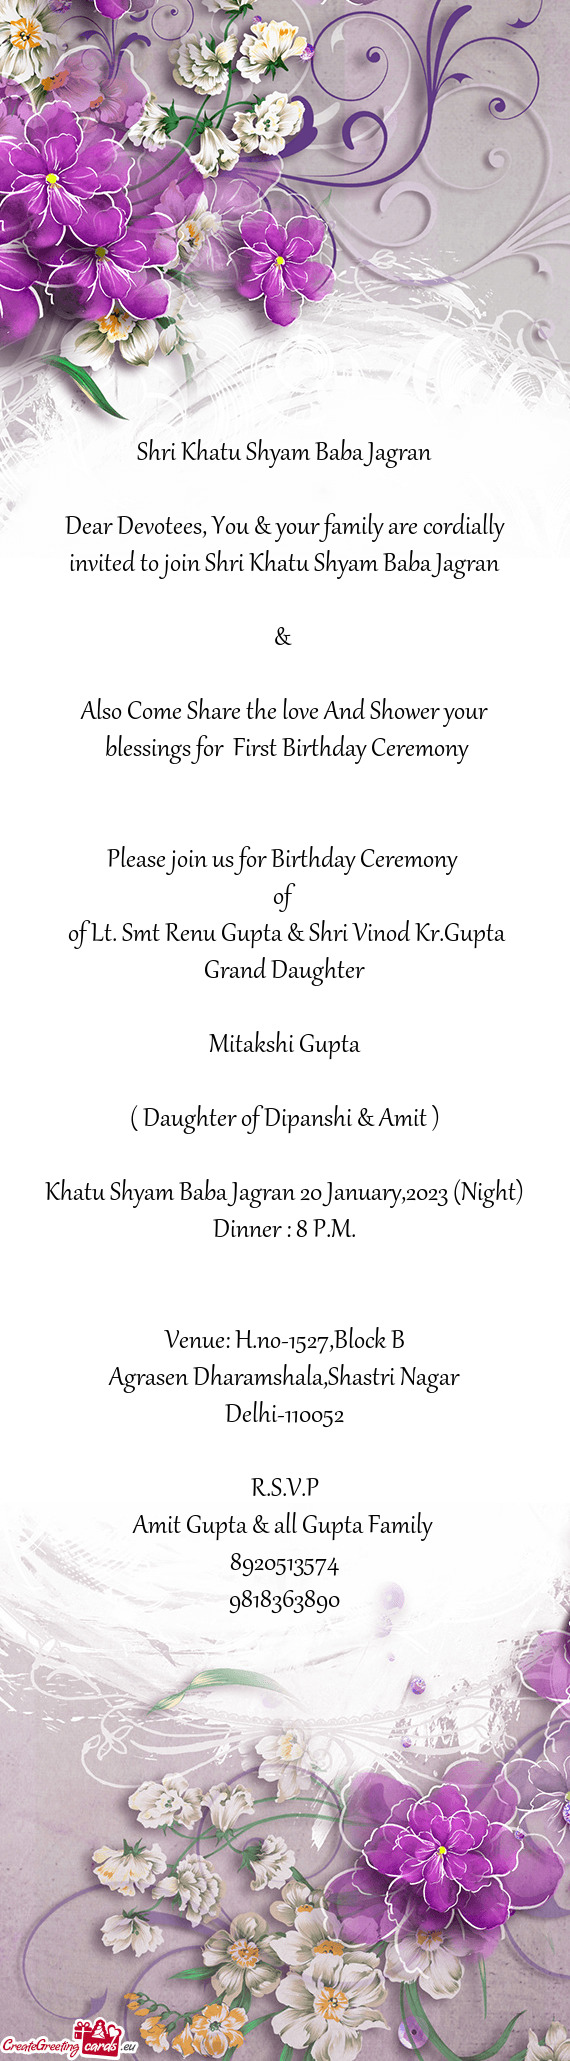 Blessings for First Birthday Ceremony